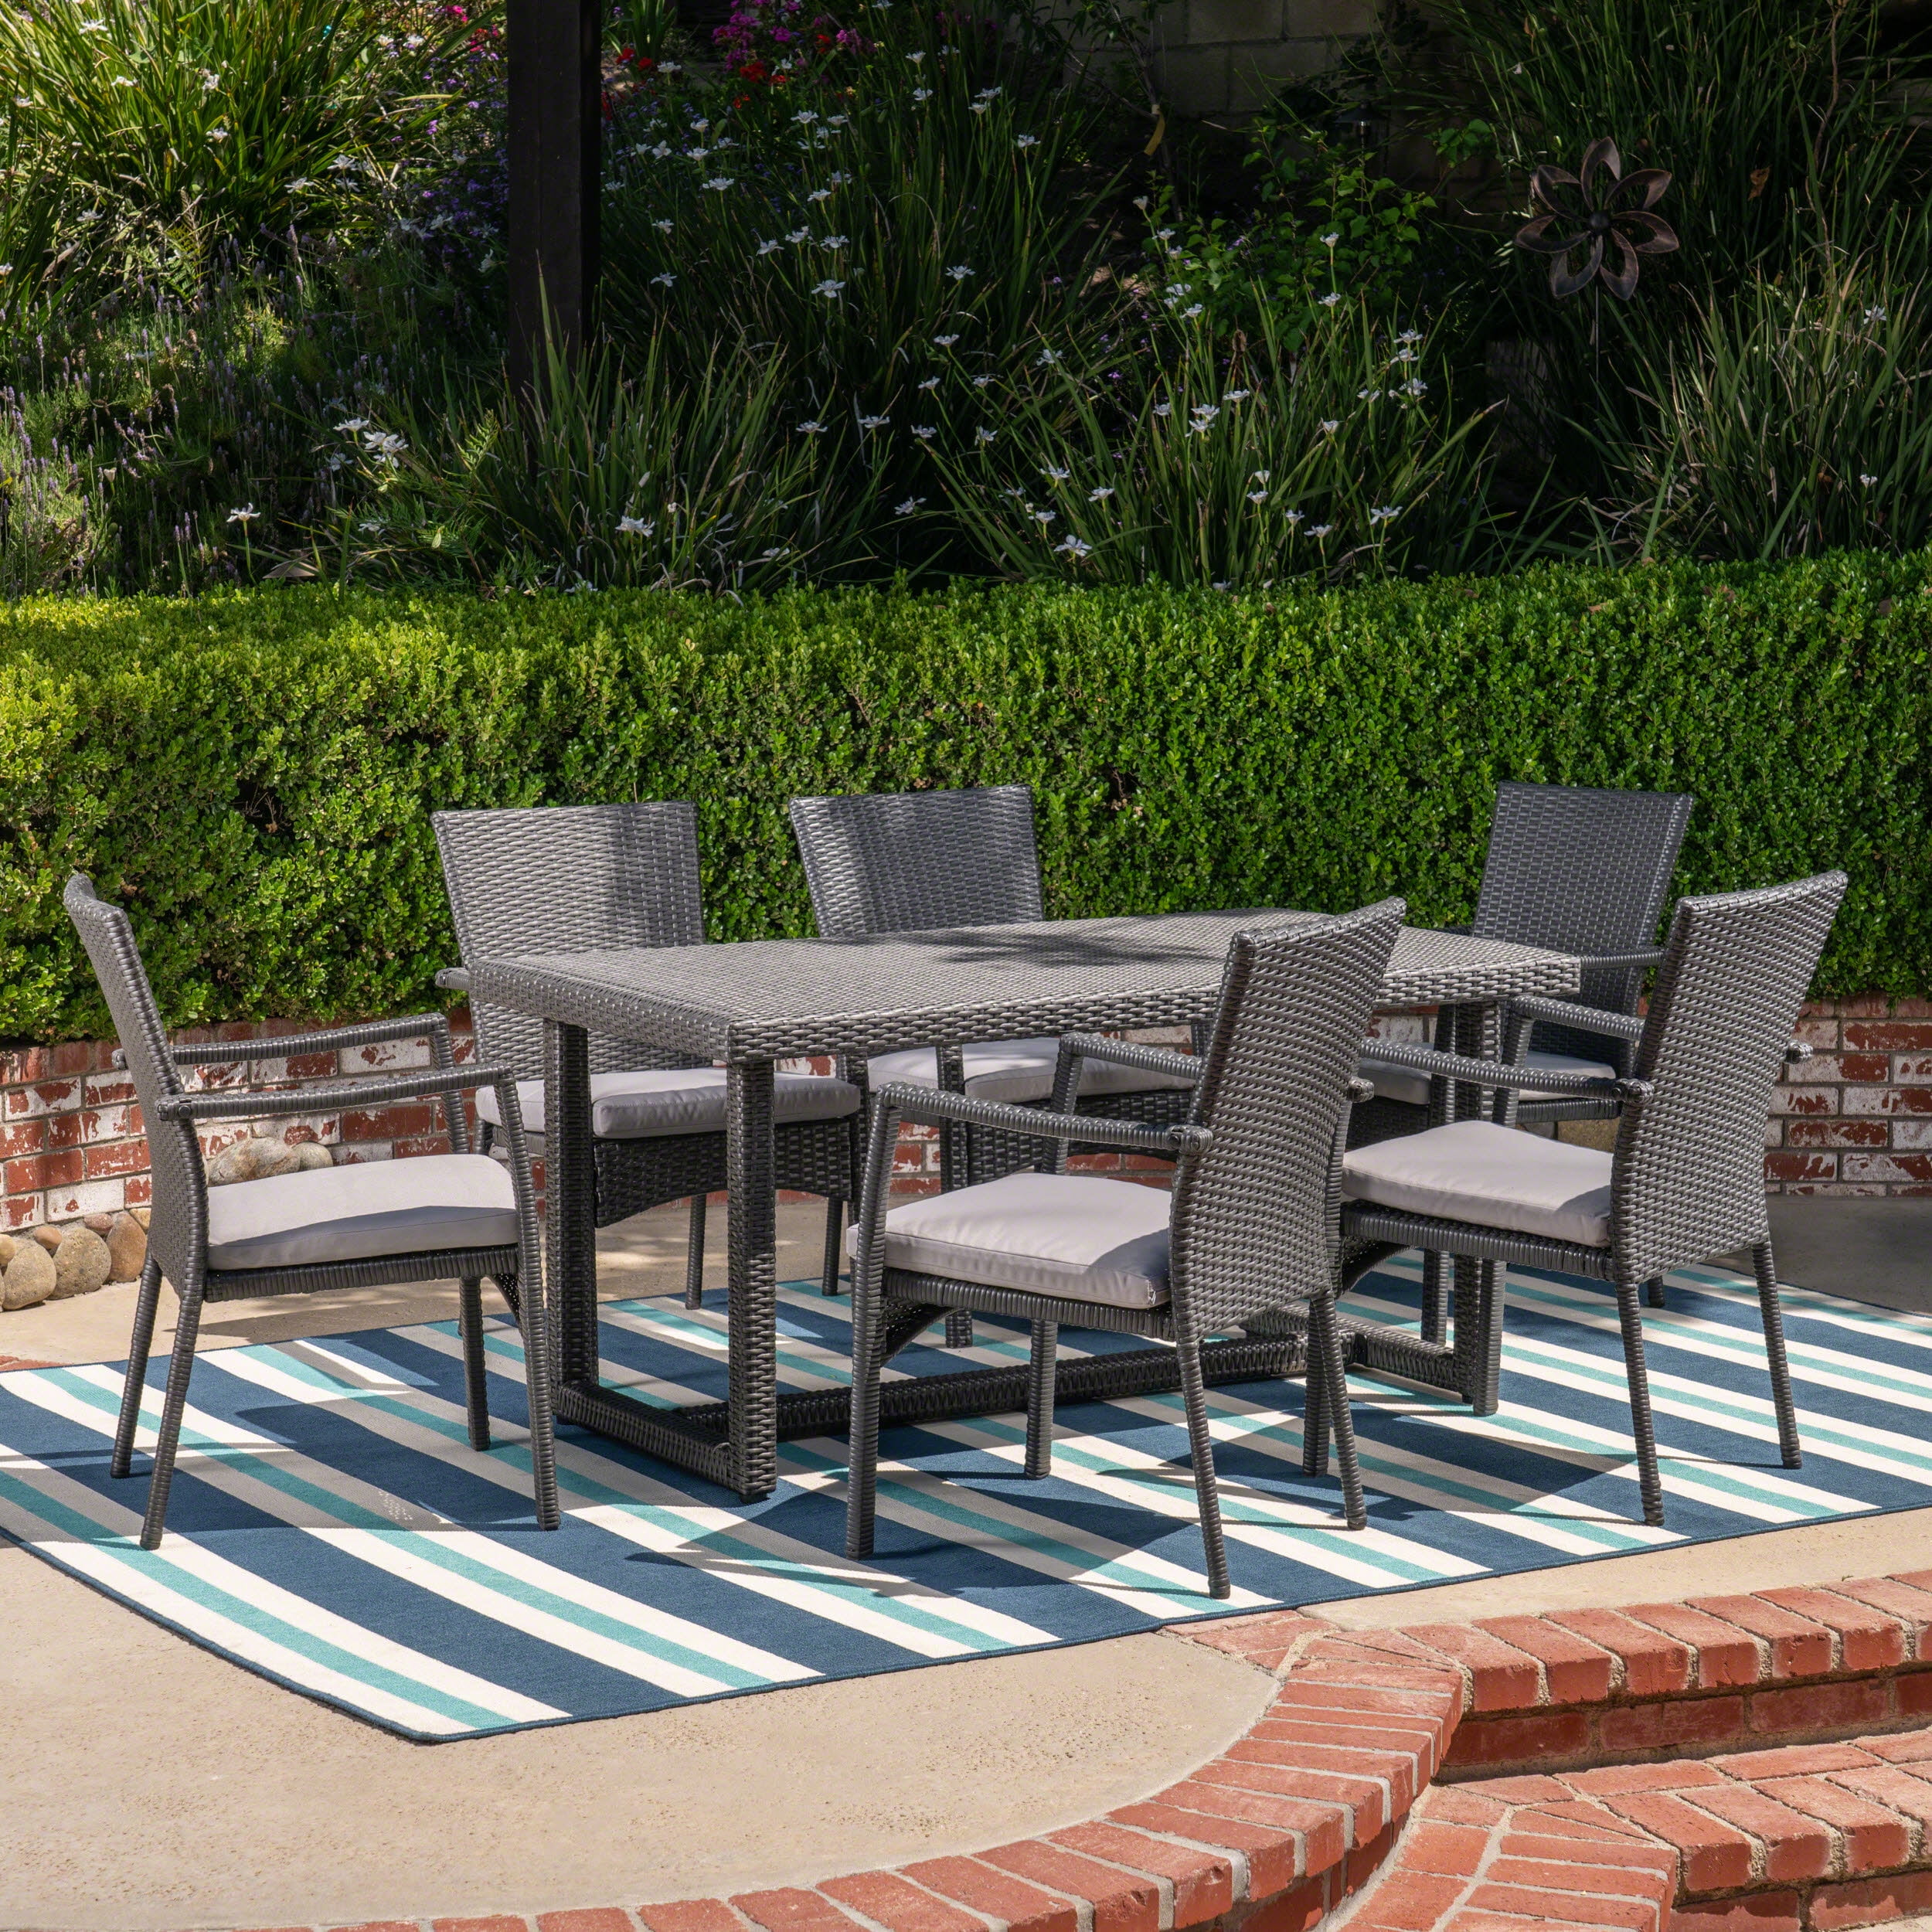 Giovanni Outdoor 7 Piece Wicker Dining Set with Cushions, Grey